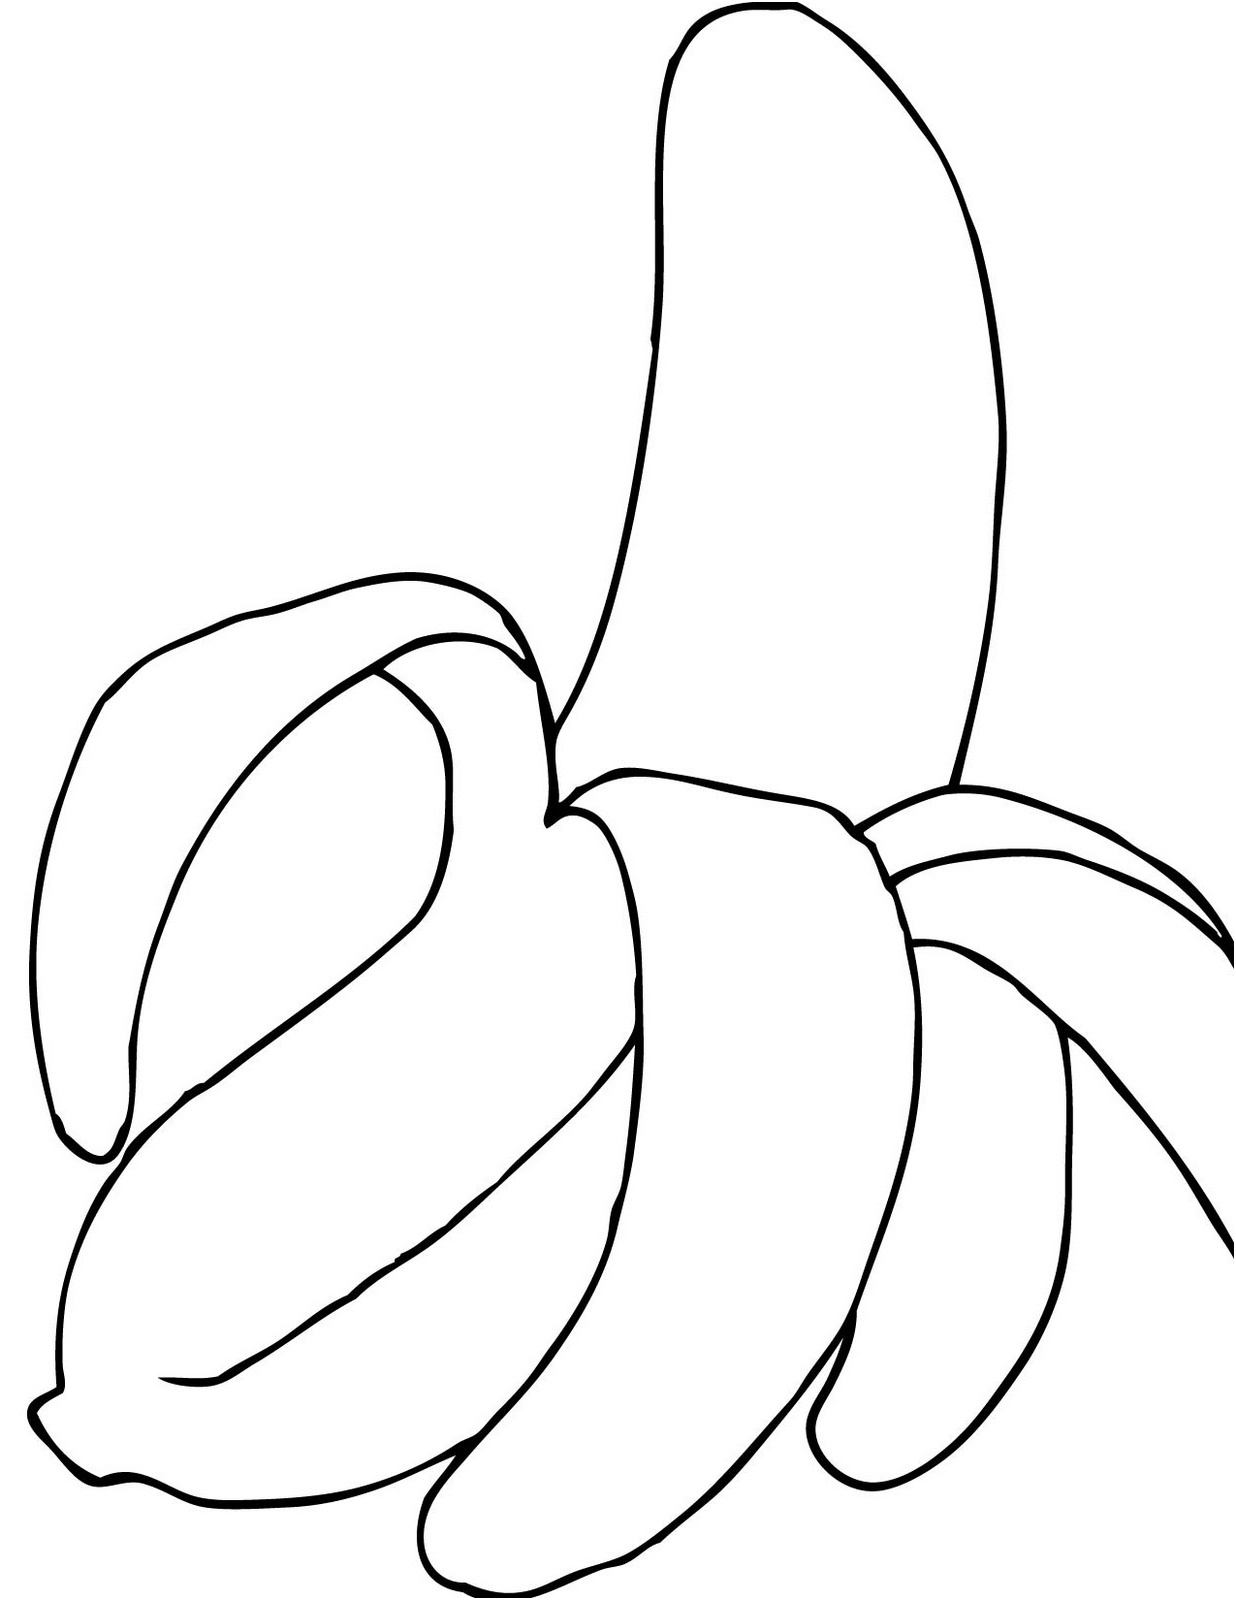 bananas coloring pages